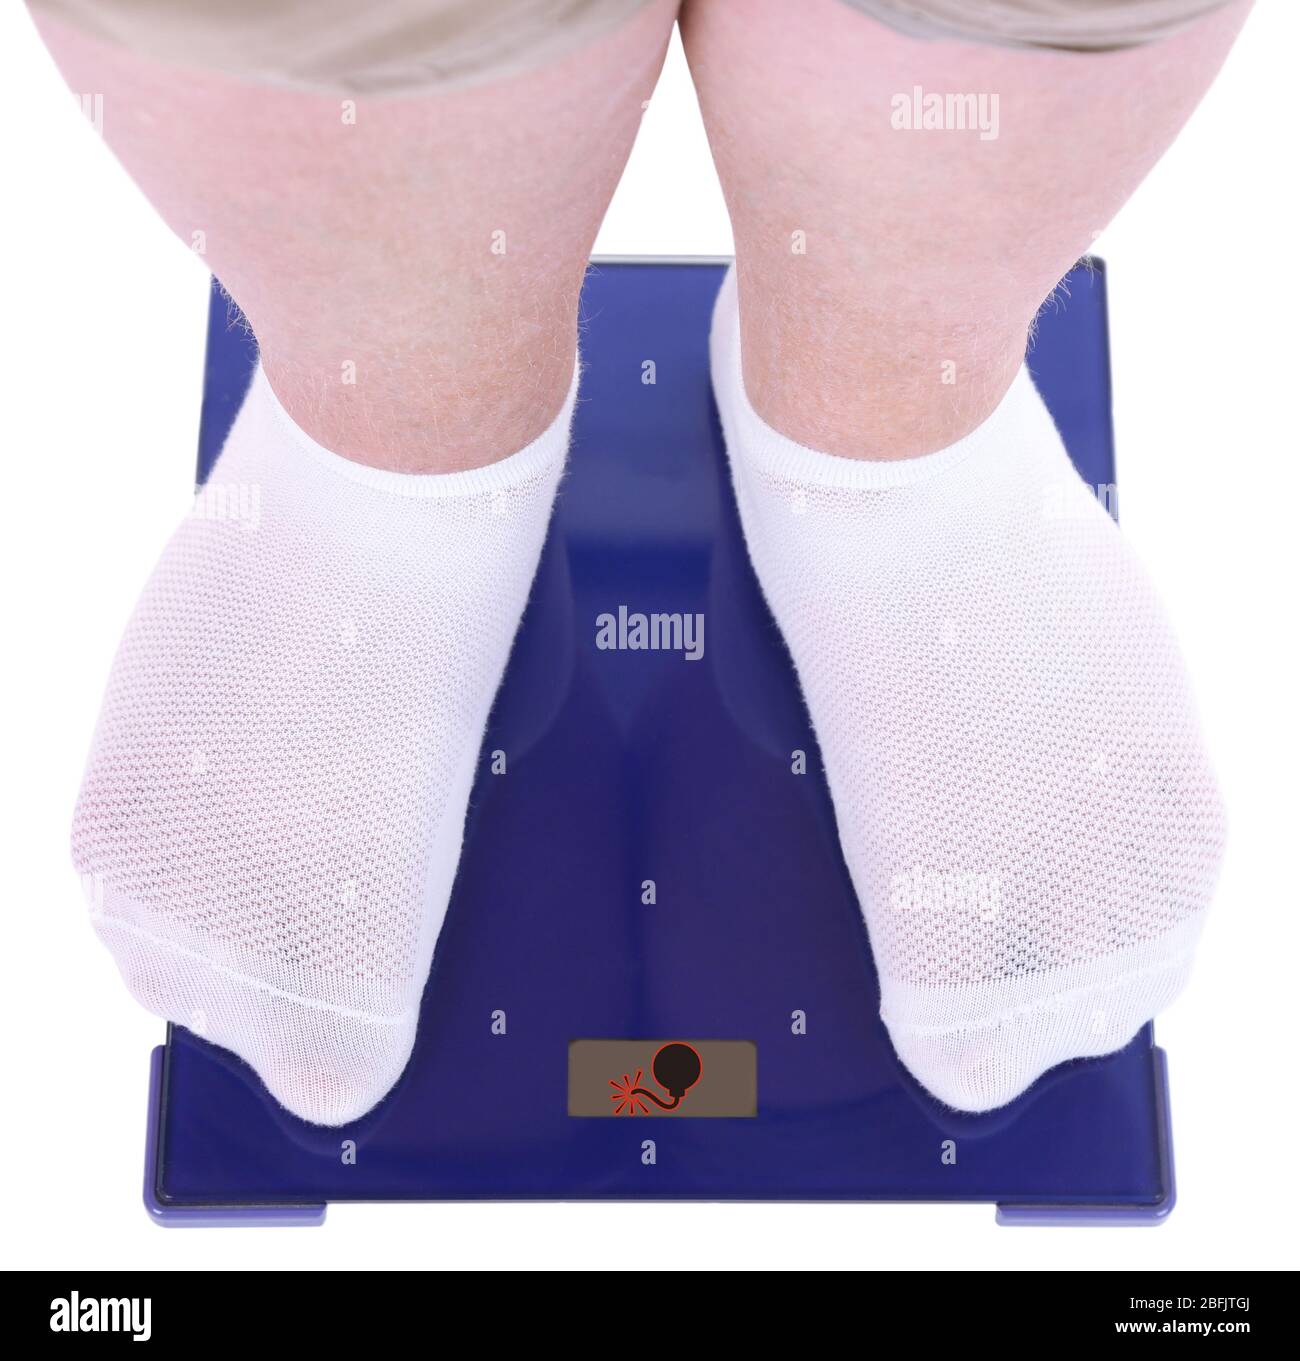 https://c8.alamy.com/comp/2BFJTGJ/fat-man-standing-on-electronic-scales-conceptual-photo-of-weight-loss-2BFJTGJ.jpg